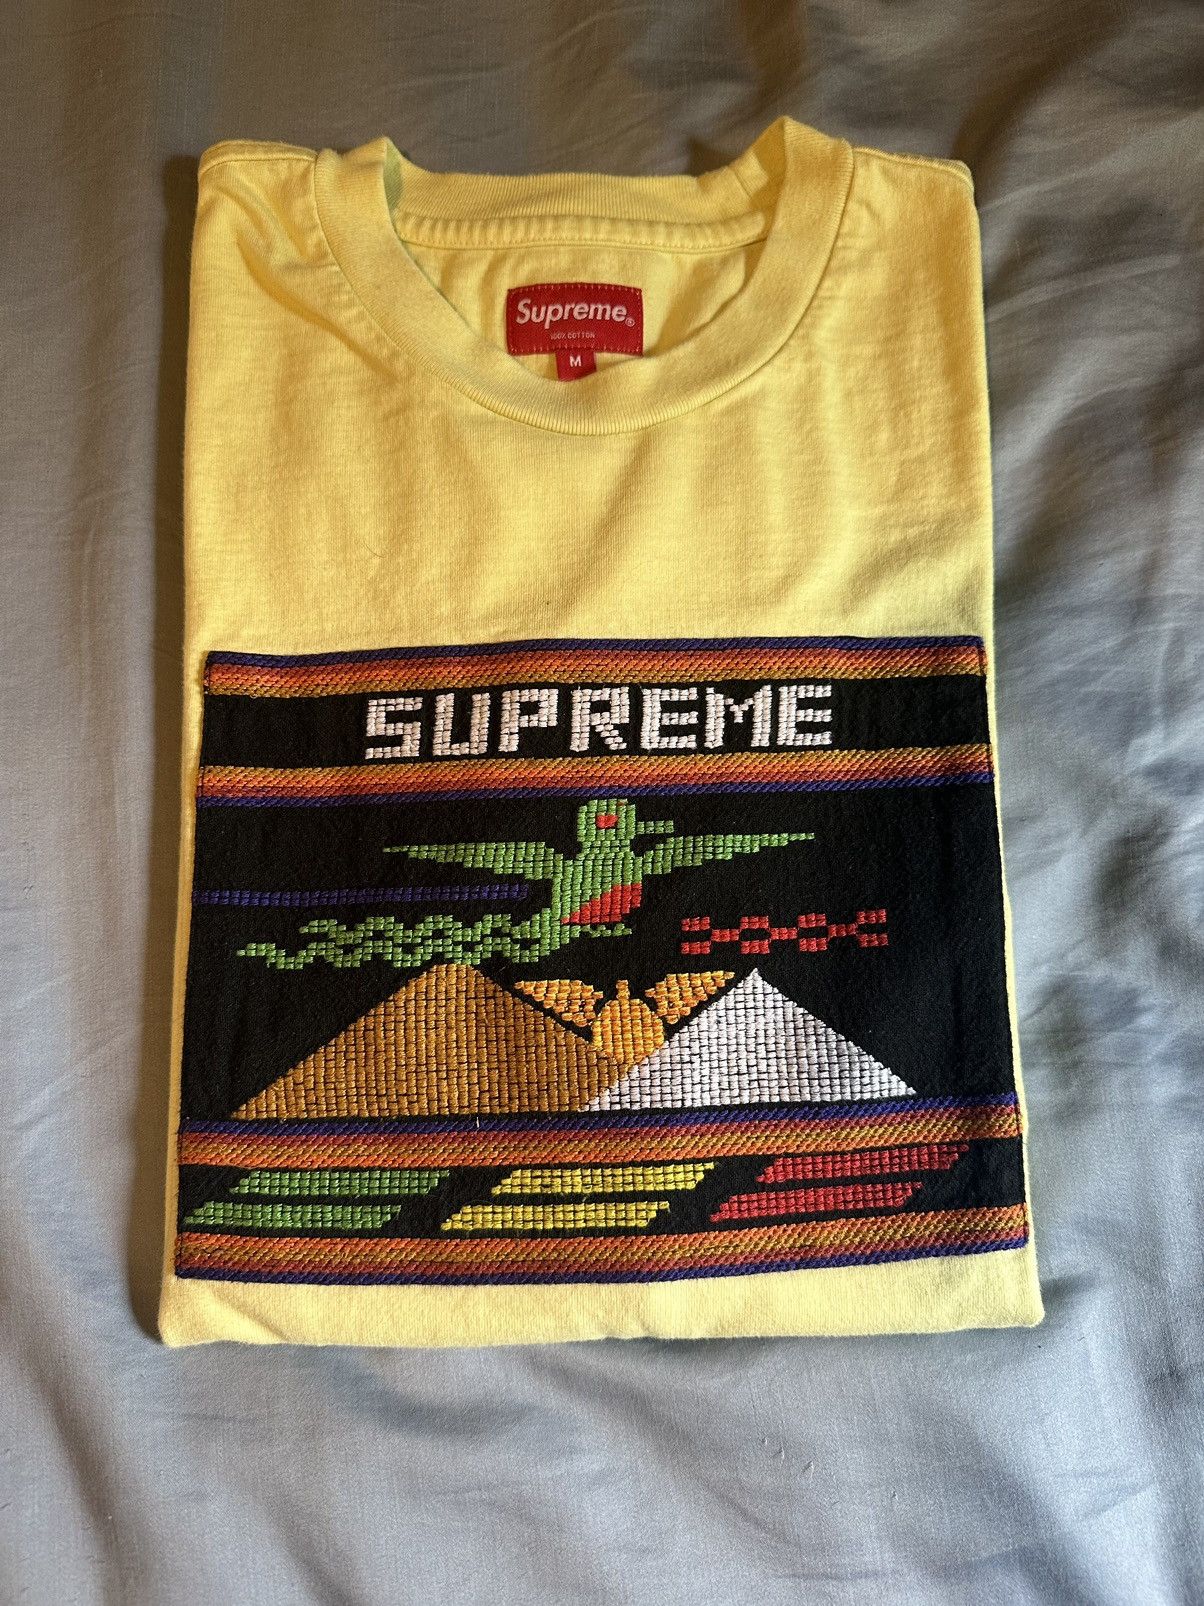 Supreme Supreme Needlepoint Patch L/S Top | Grailed